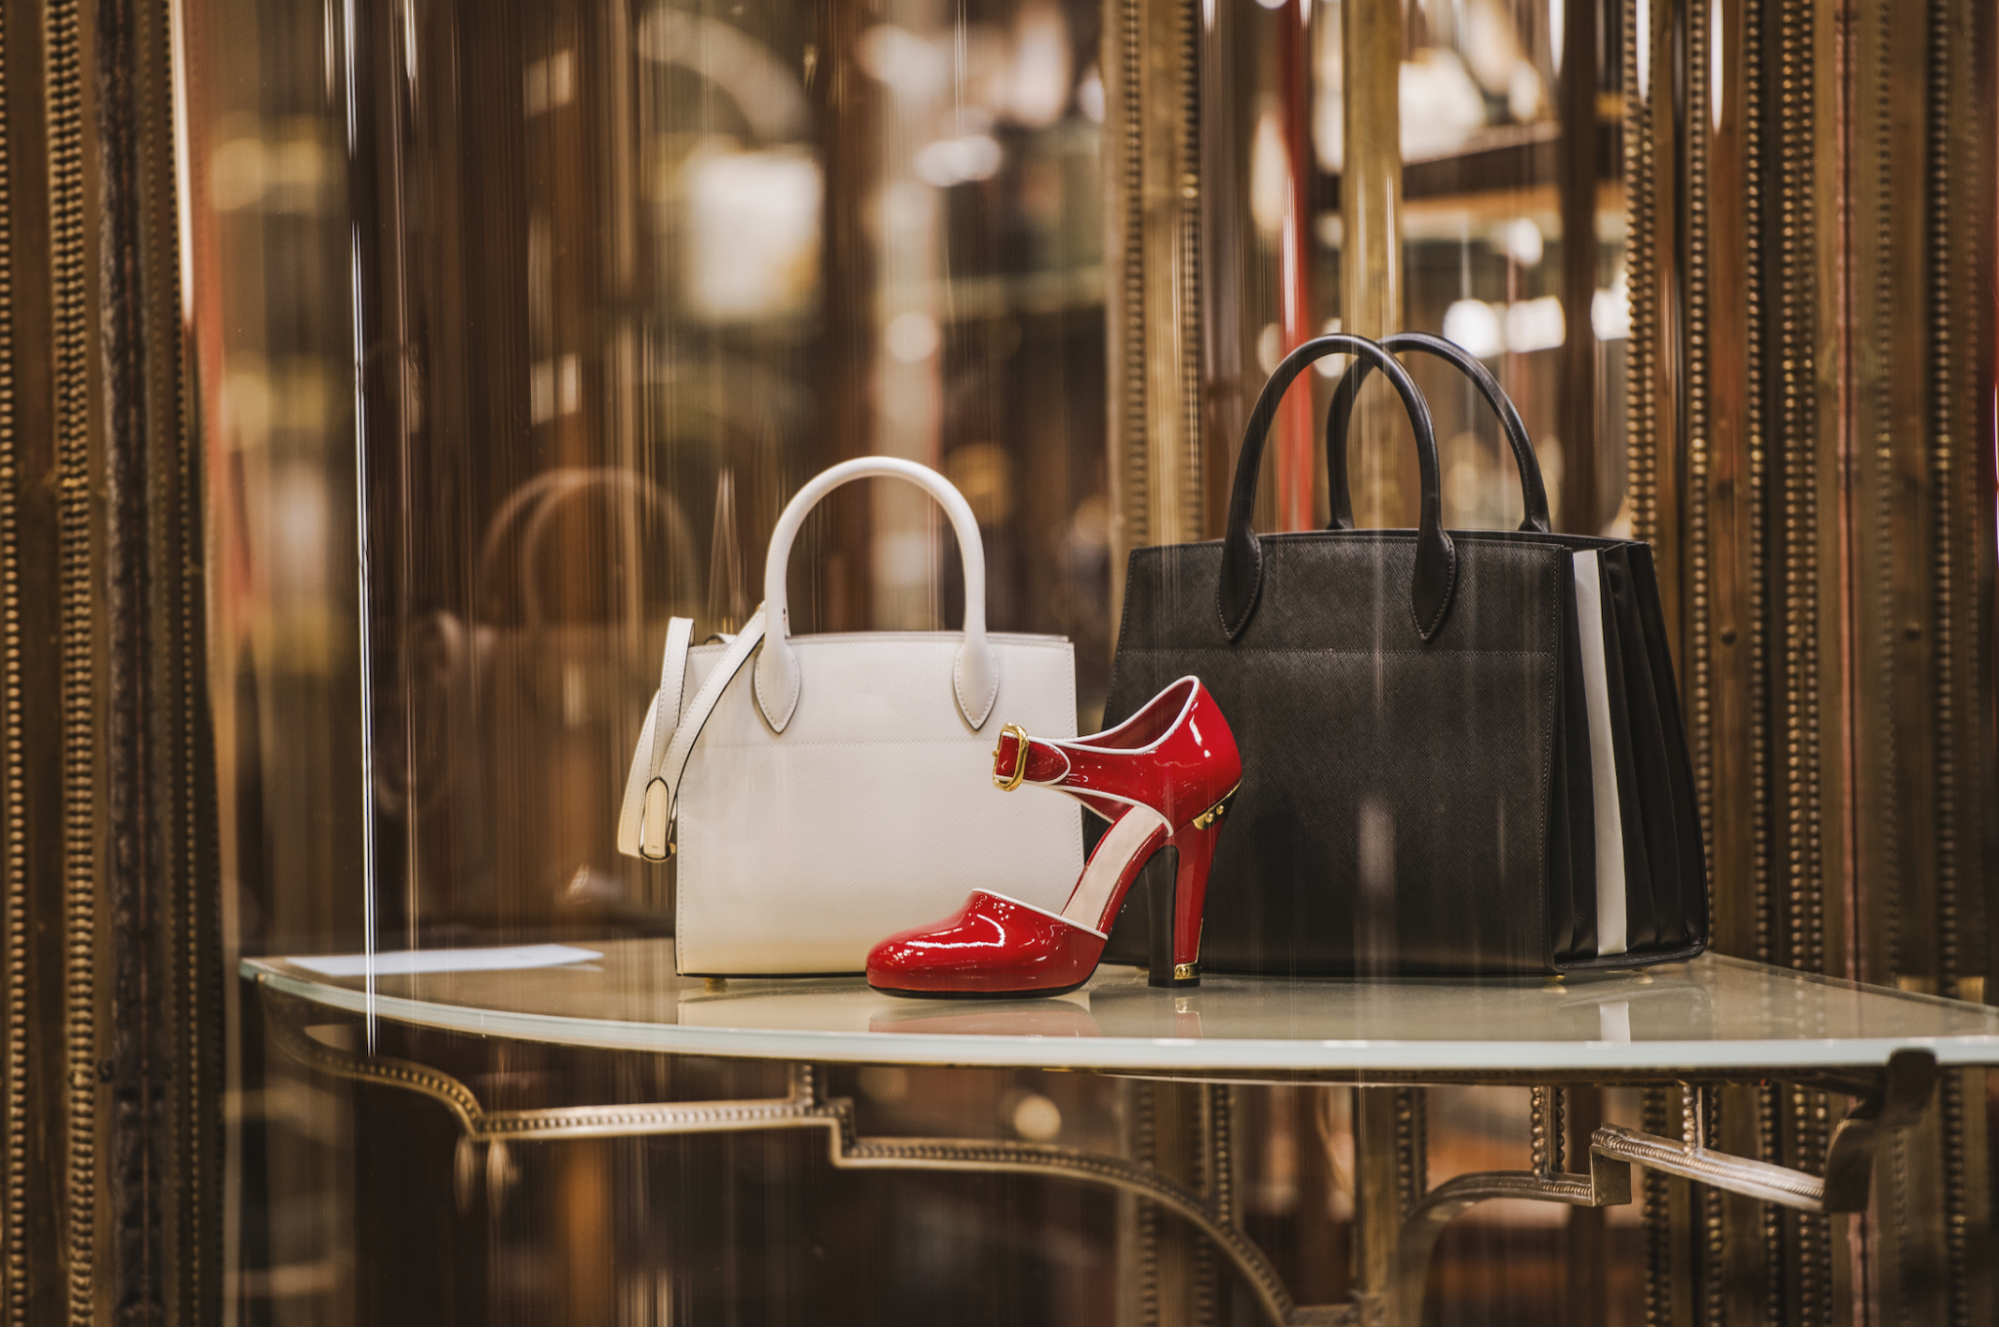 Rising Retail Prices for Luxury Goods Drives Secondary Market